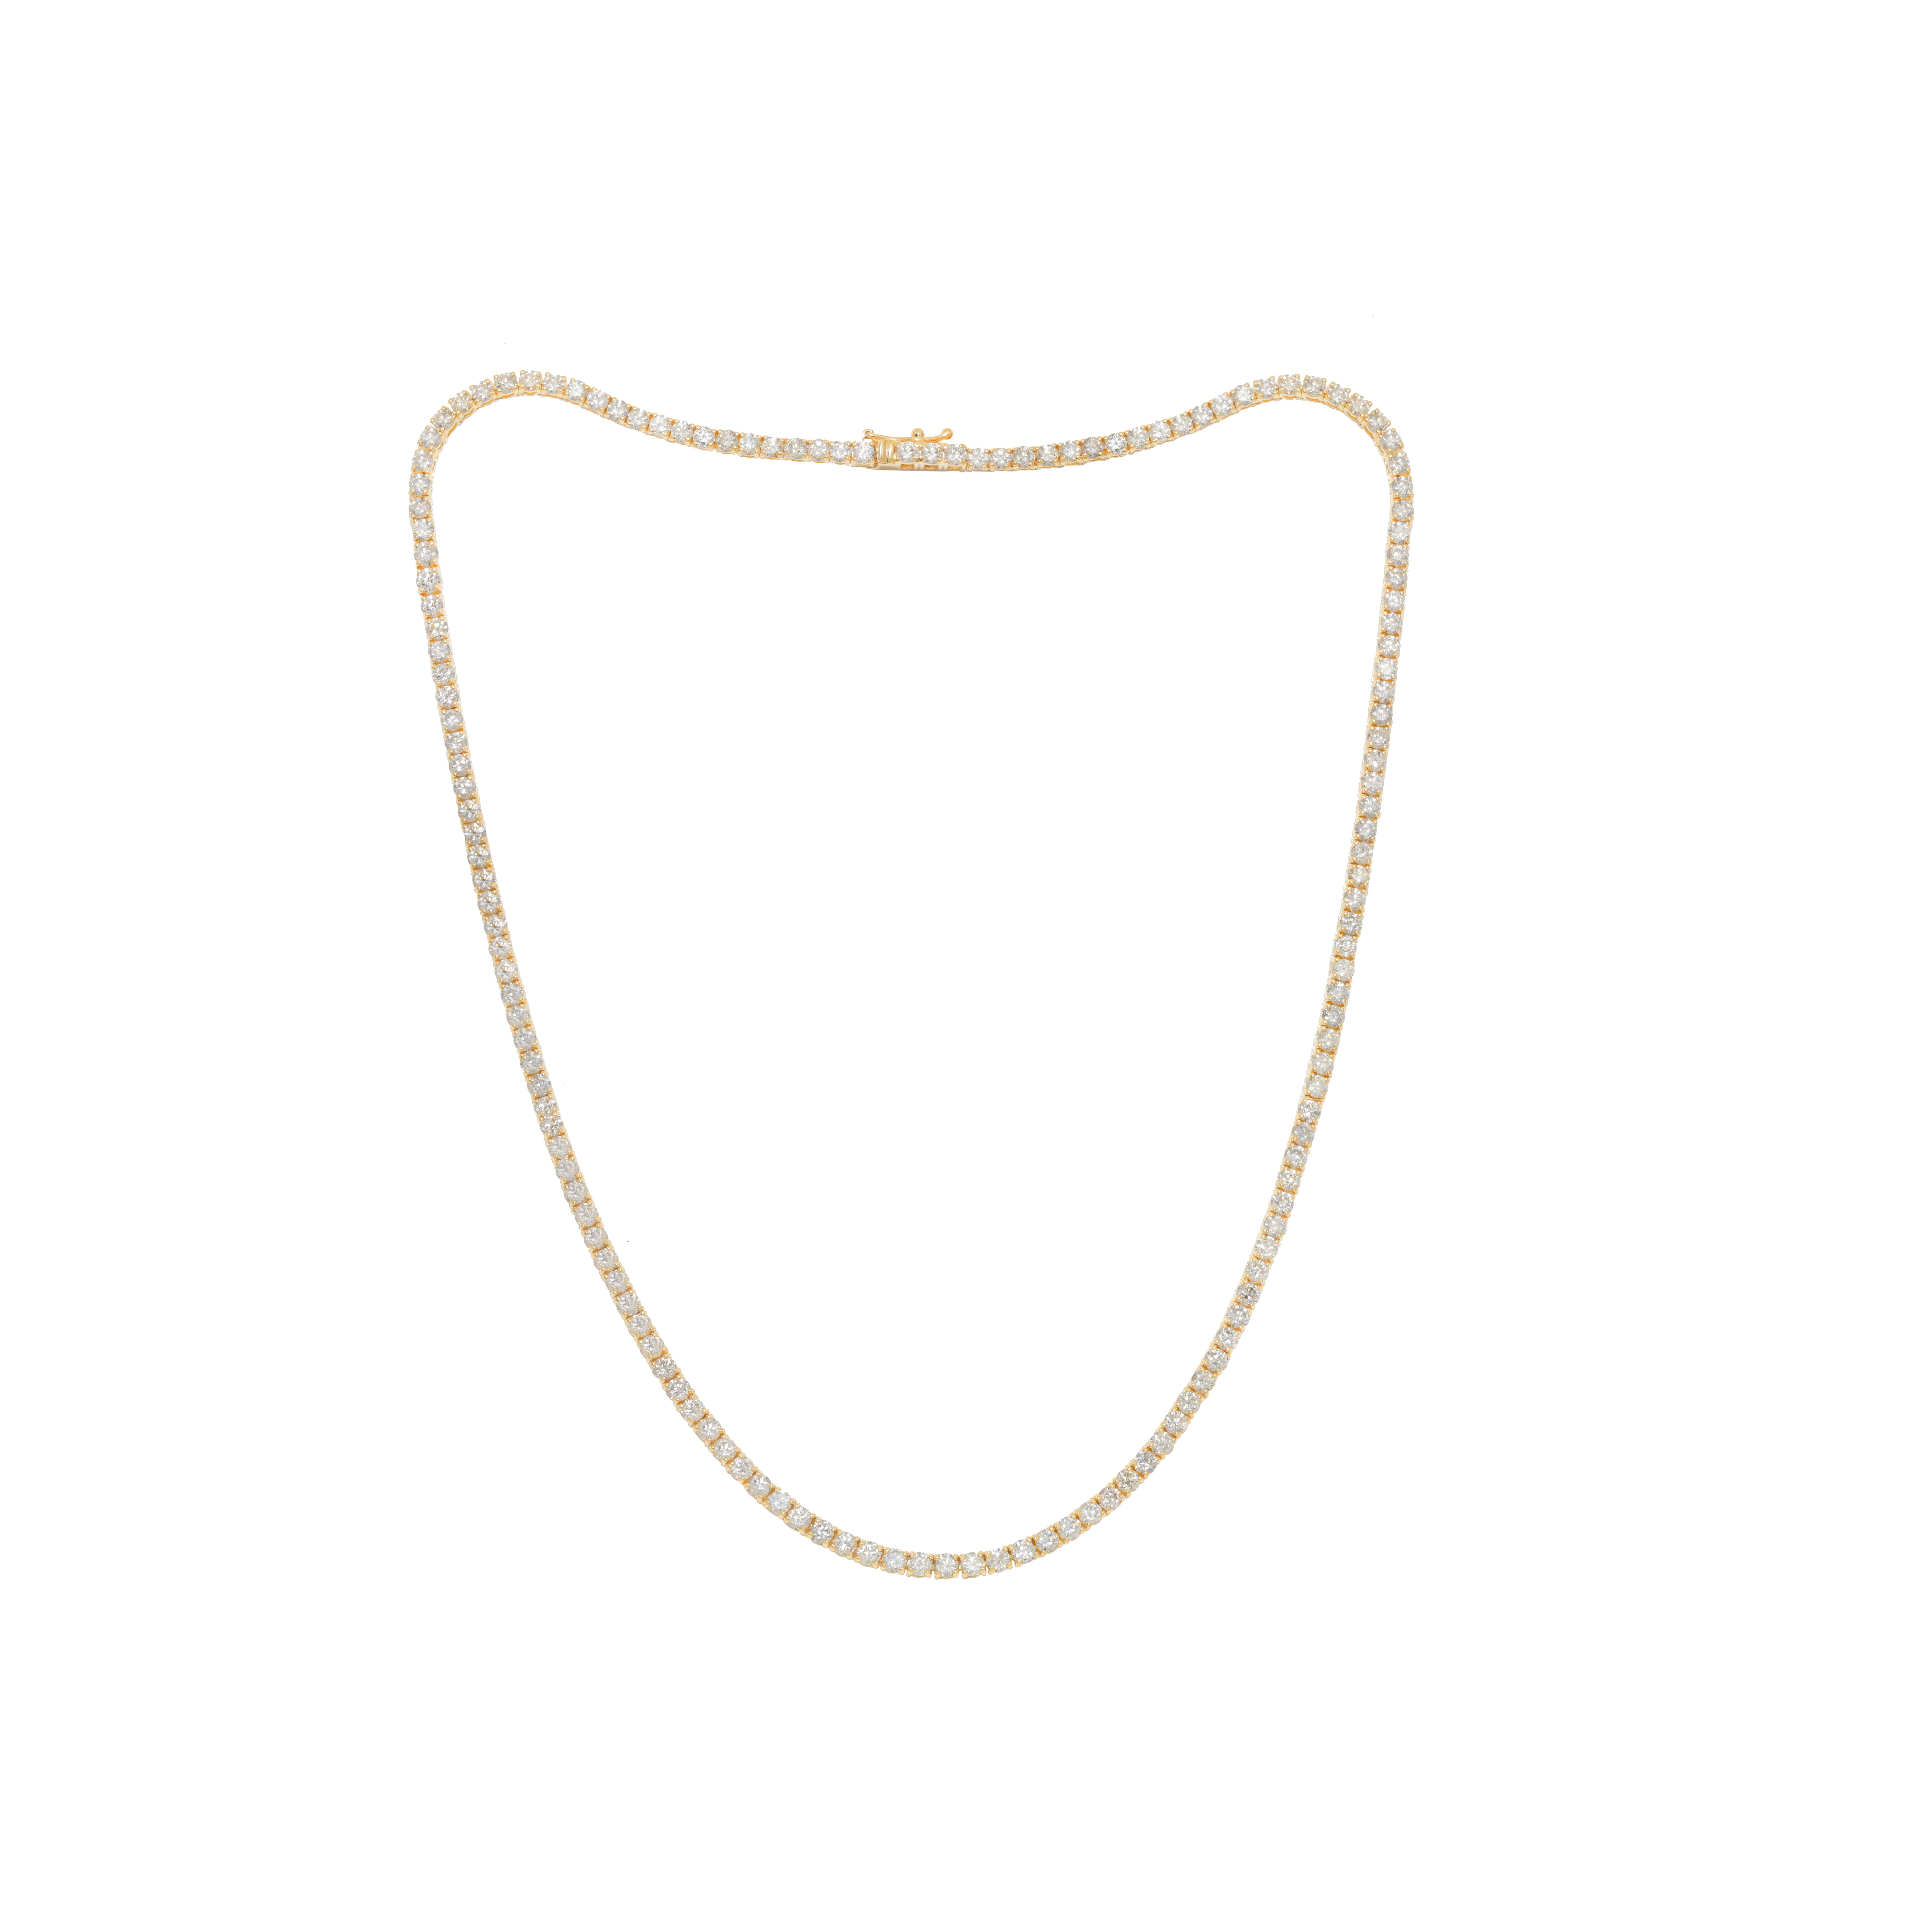 14K Yellow Gold Diamond Straight Line Tennis Necklace Features 13.20Cts of Diamonds, 144St. Diana M. is a leading supplier of top-quality fine jewelry for over 35 years.
Diana M is one-stop shop for all your jewelry shopping, carrying line of